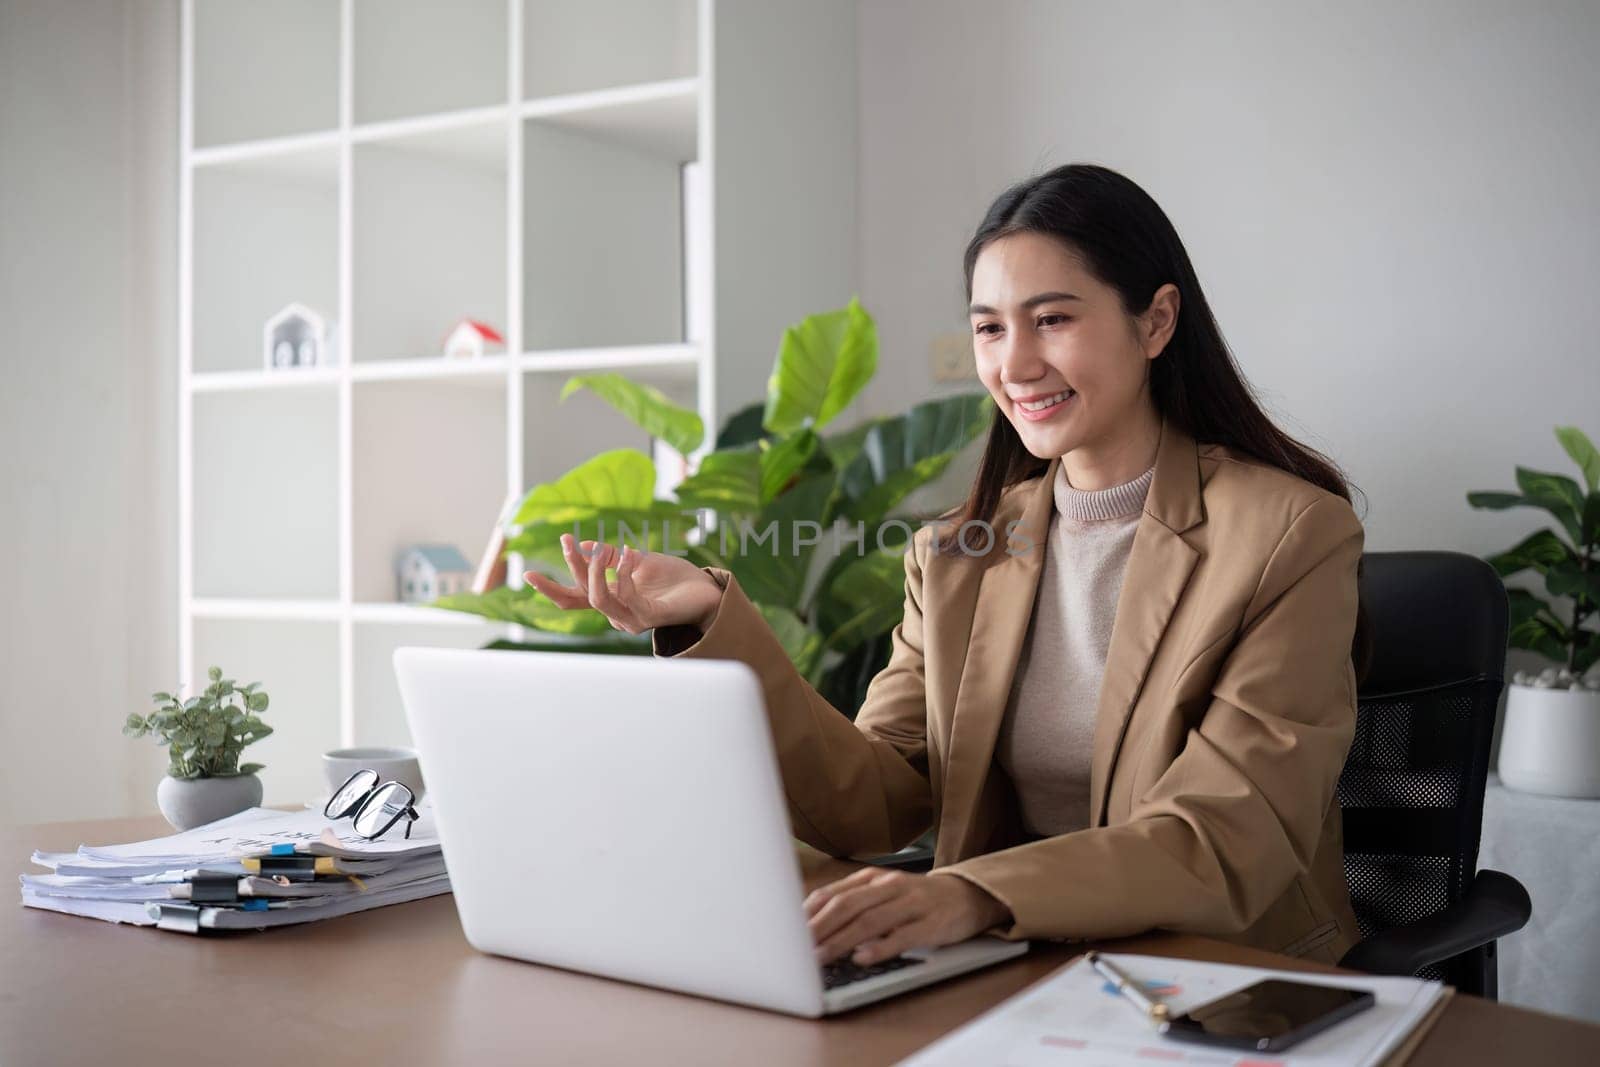 Young Asian business woman sits and works using a laptop in a modern office decorated with shady green plants..